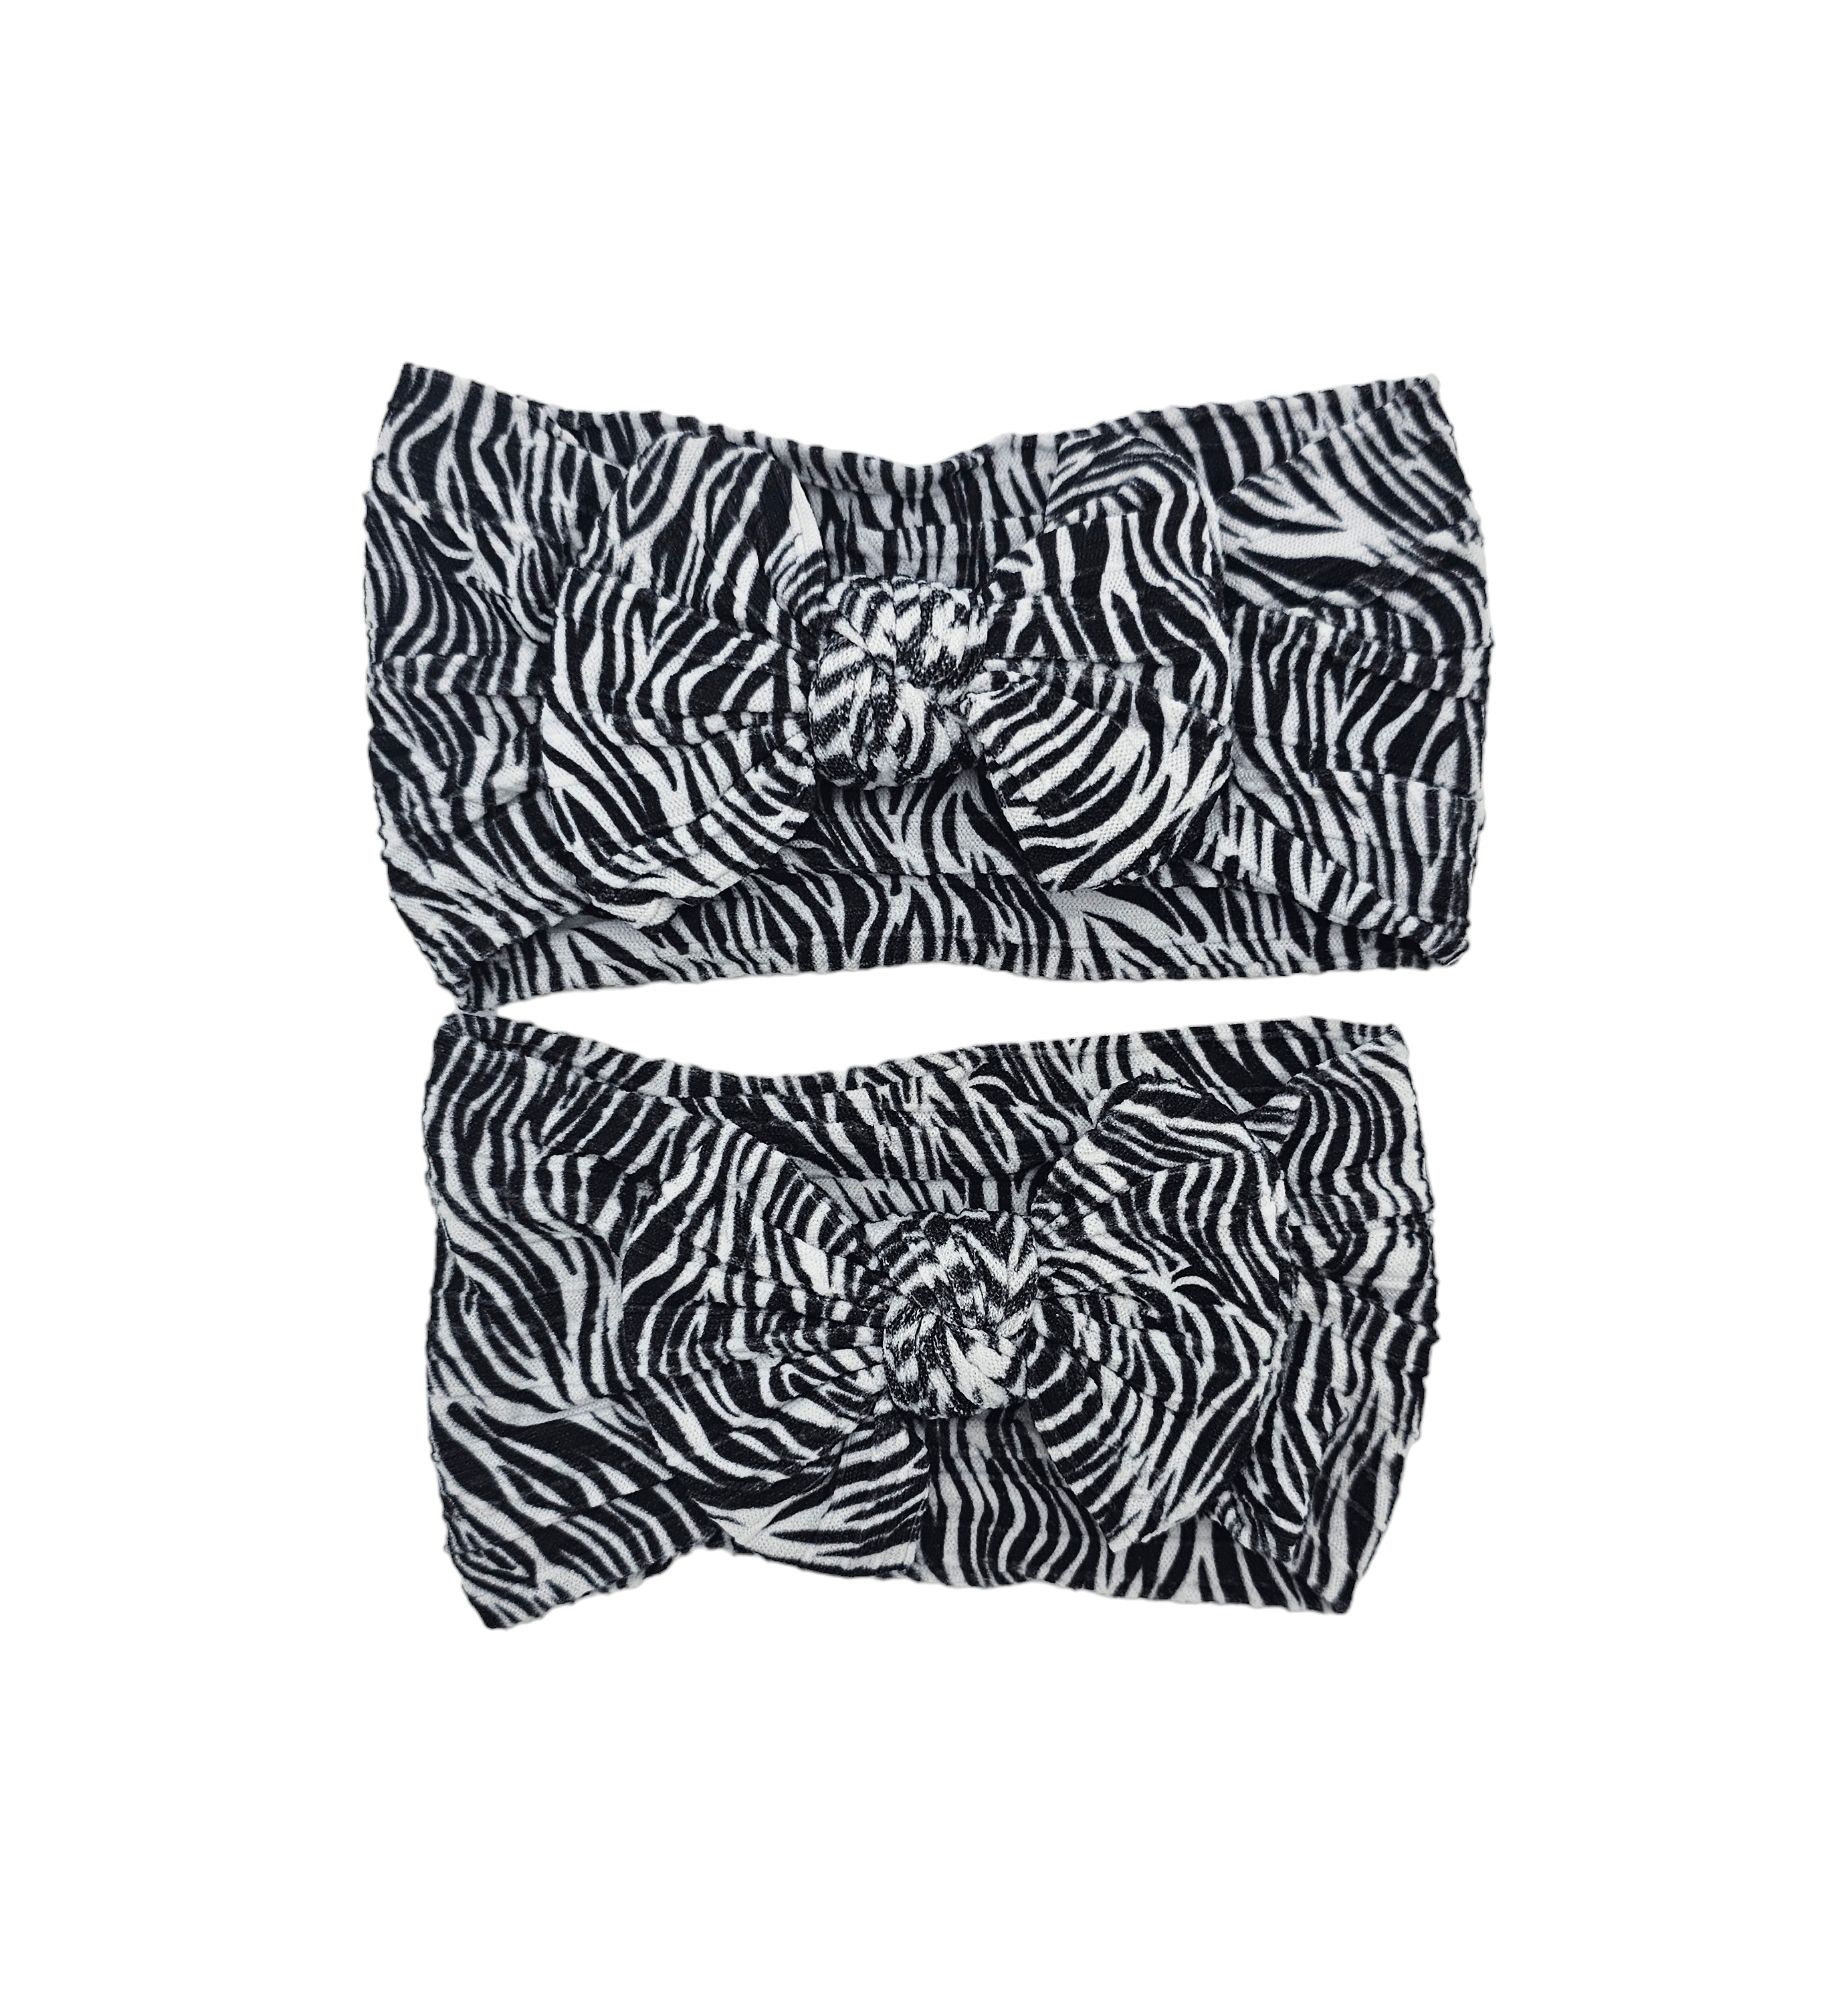 Zebra Black and White Mummy and Me Matching Cable Knit Headwraps - Betty Brown Boutique Ltd